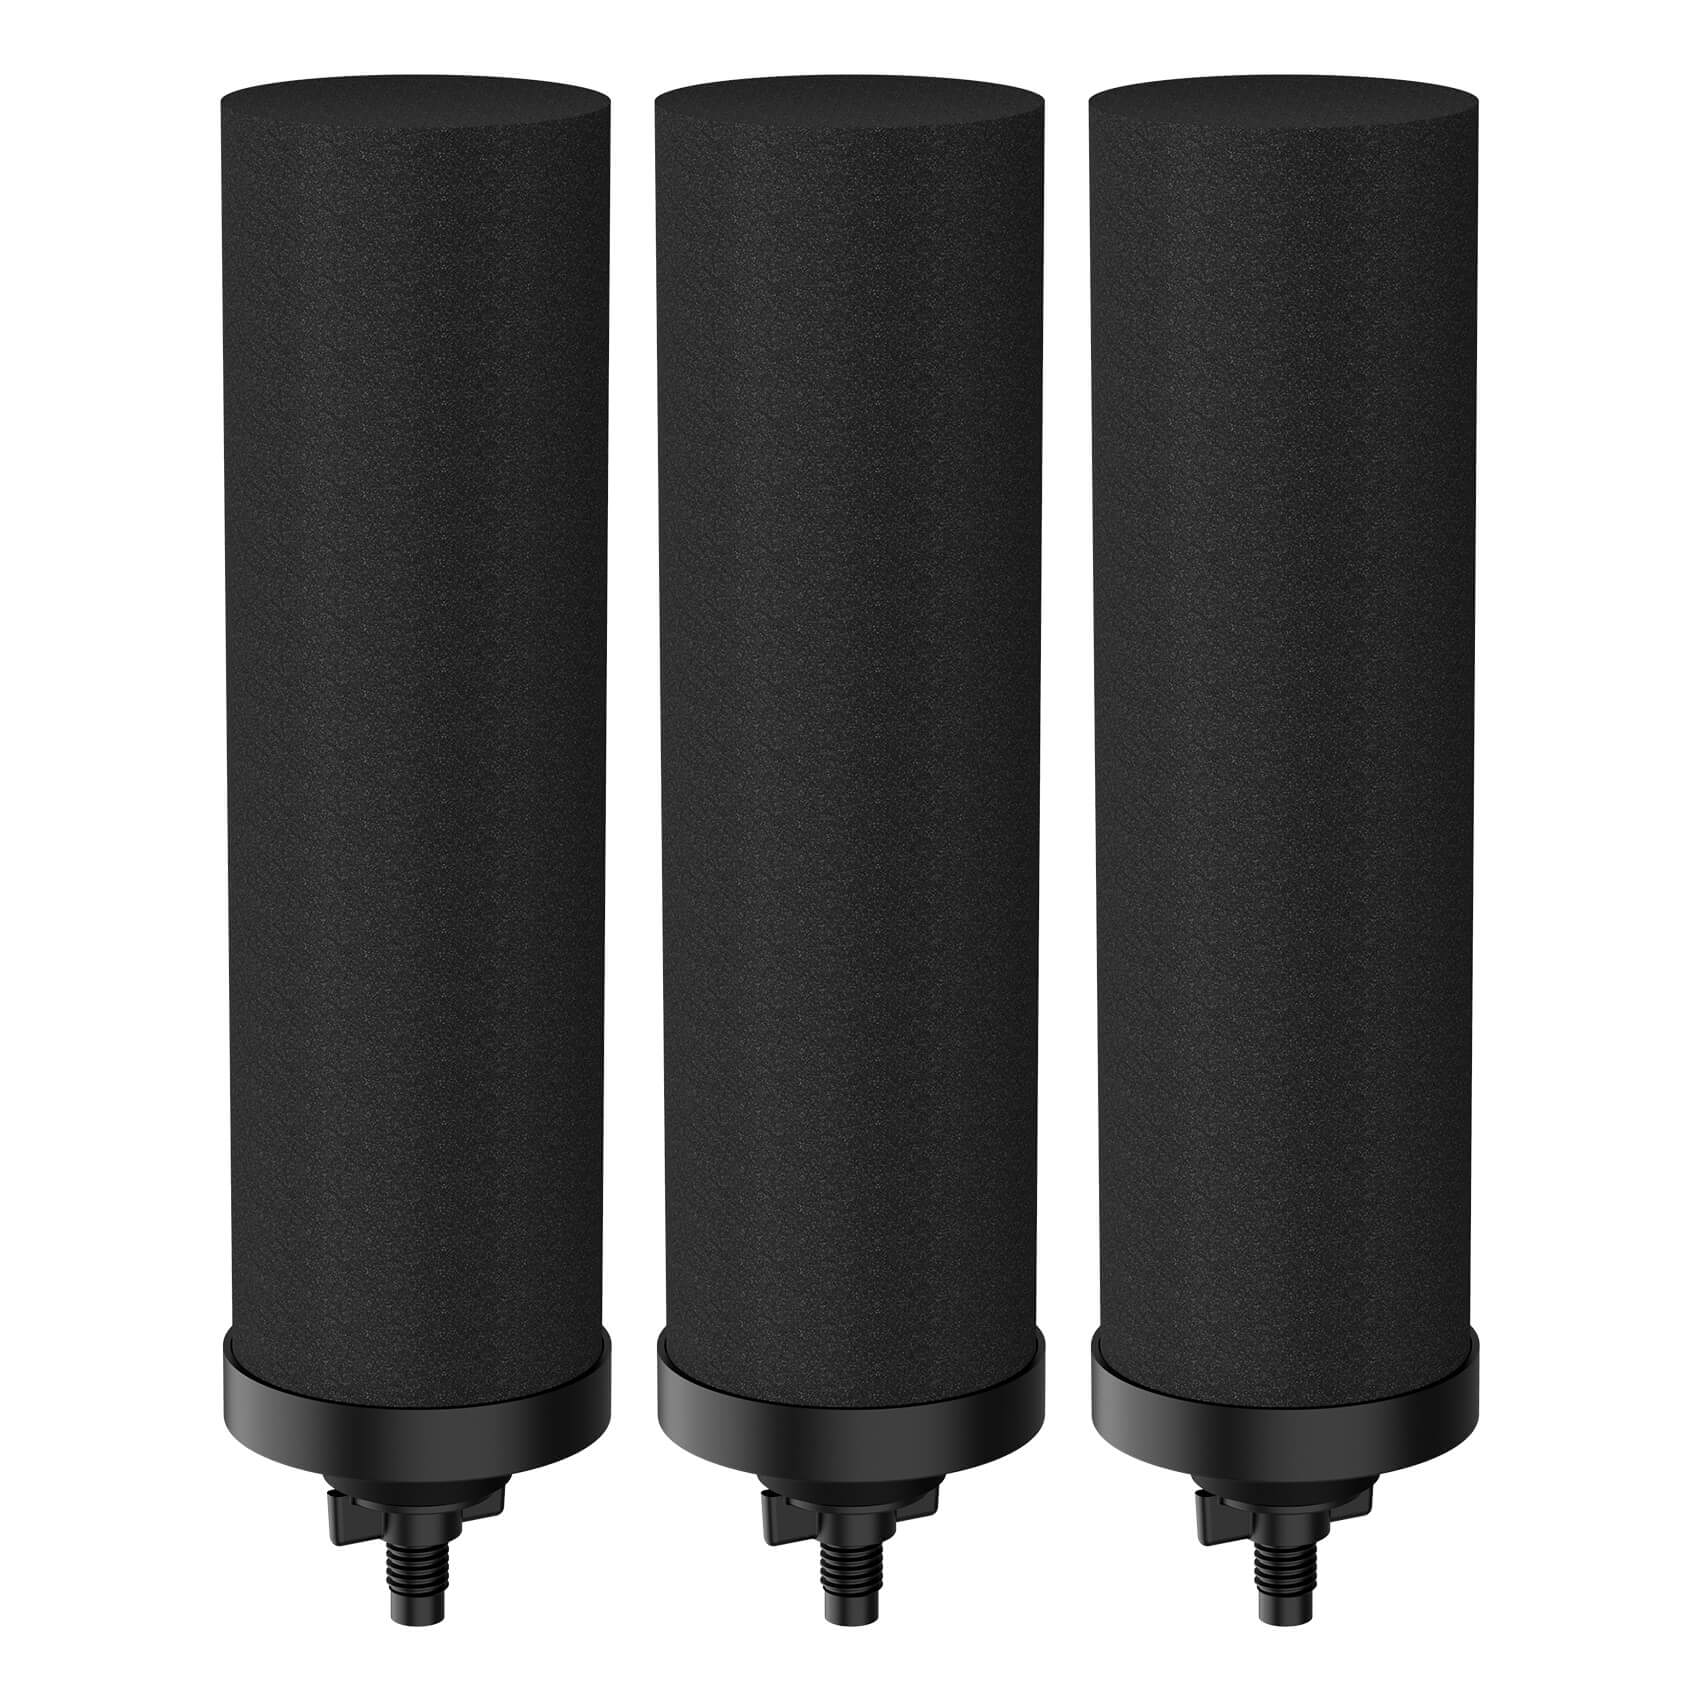 Membrane Solutions U3 Replacement Filter-Also for Berkey Water Filter